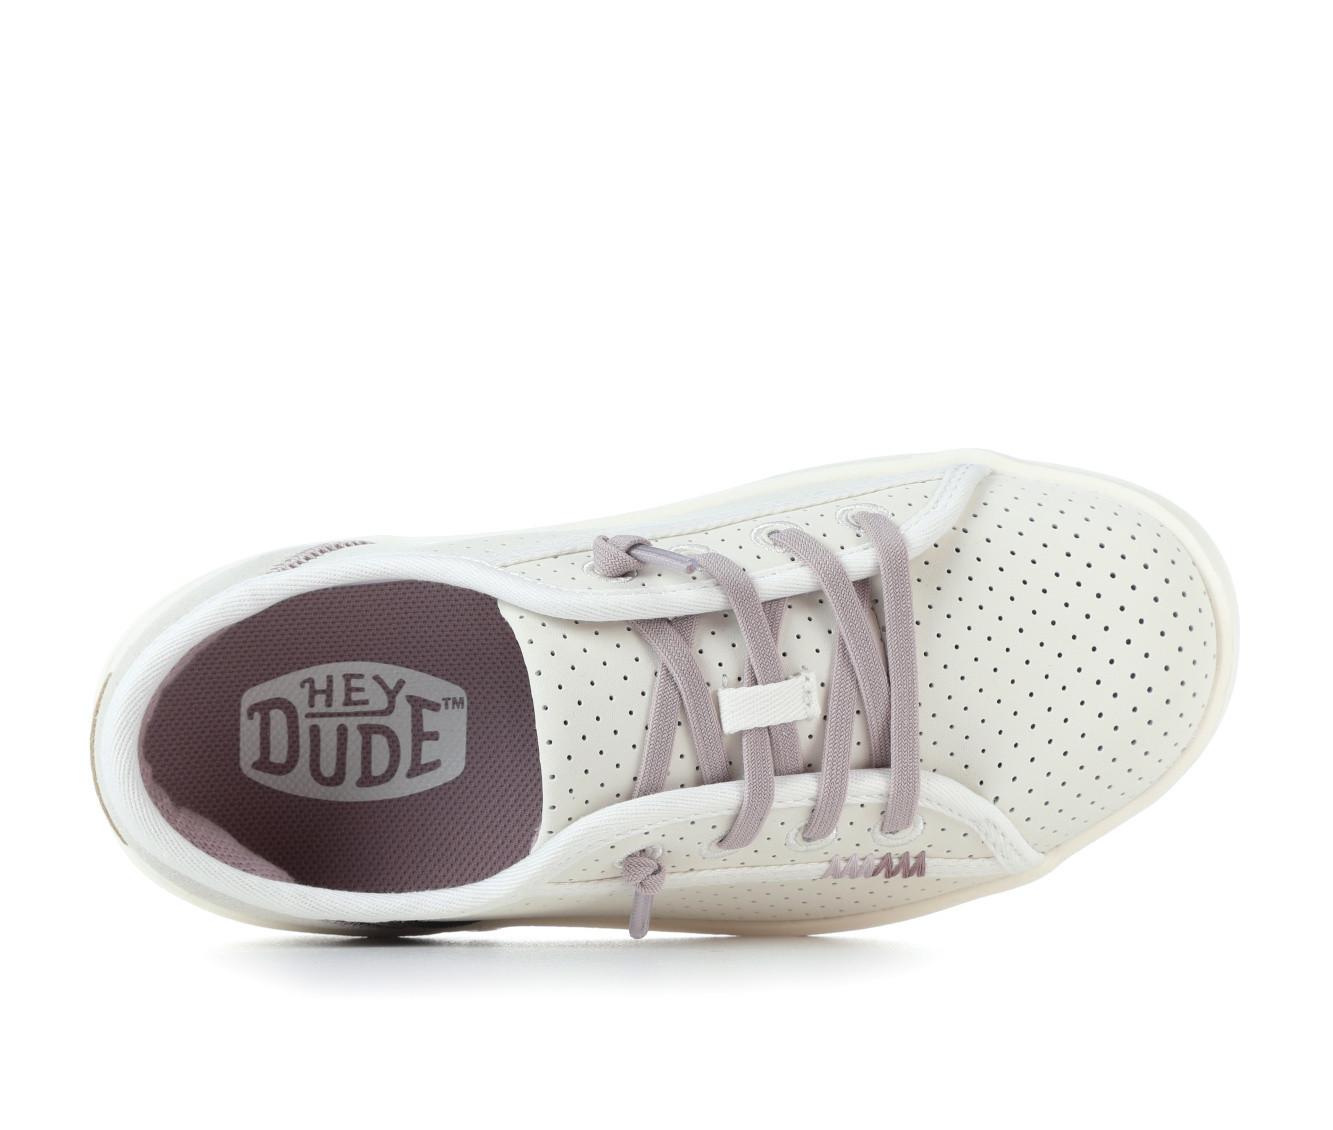 Kids' HEYDUDE Little Kid & Big Kid Youth Perferated Leather Shoes